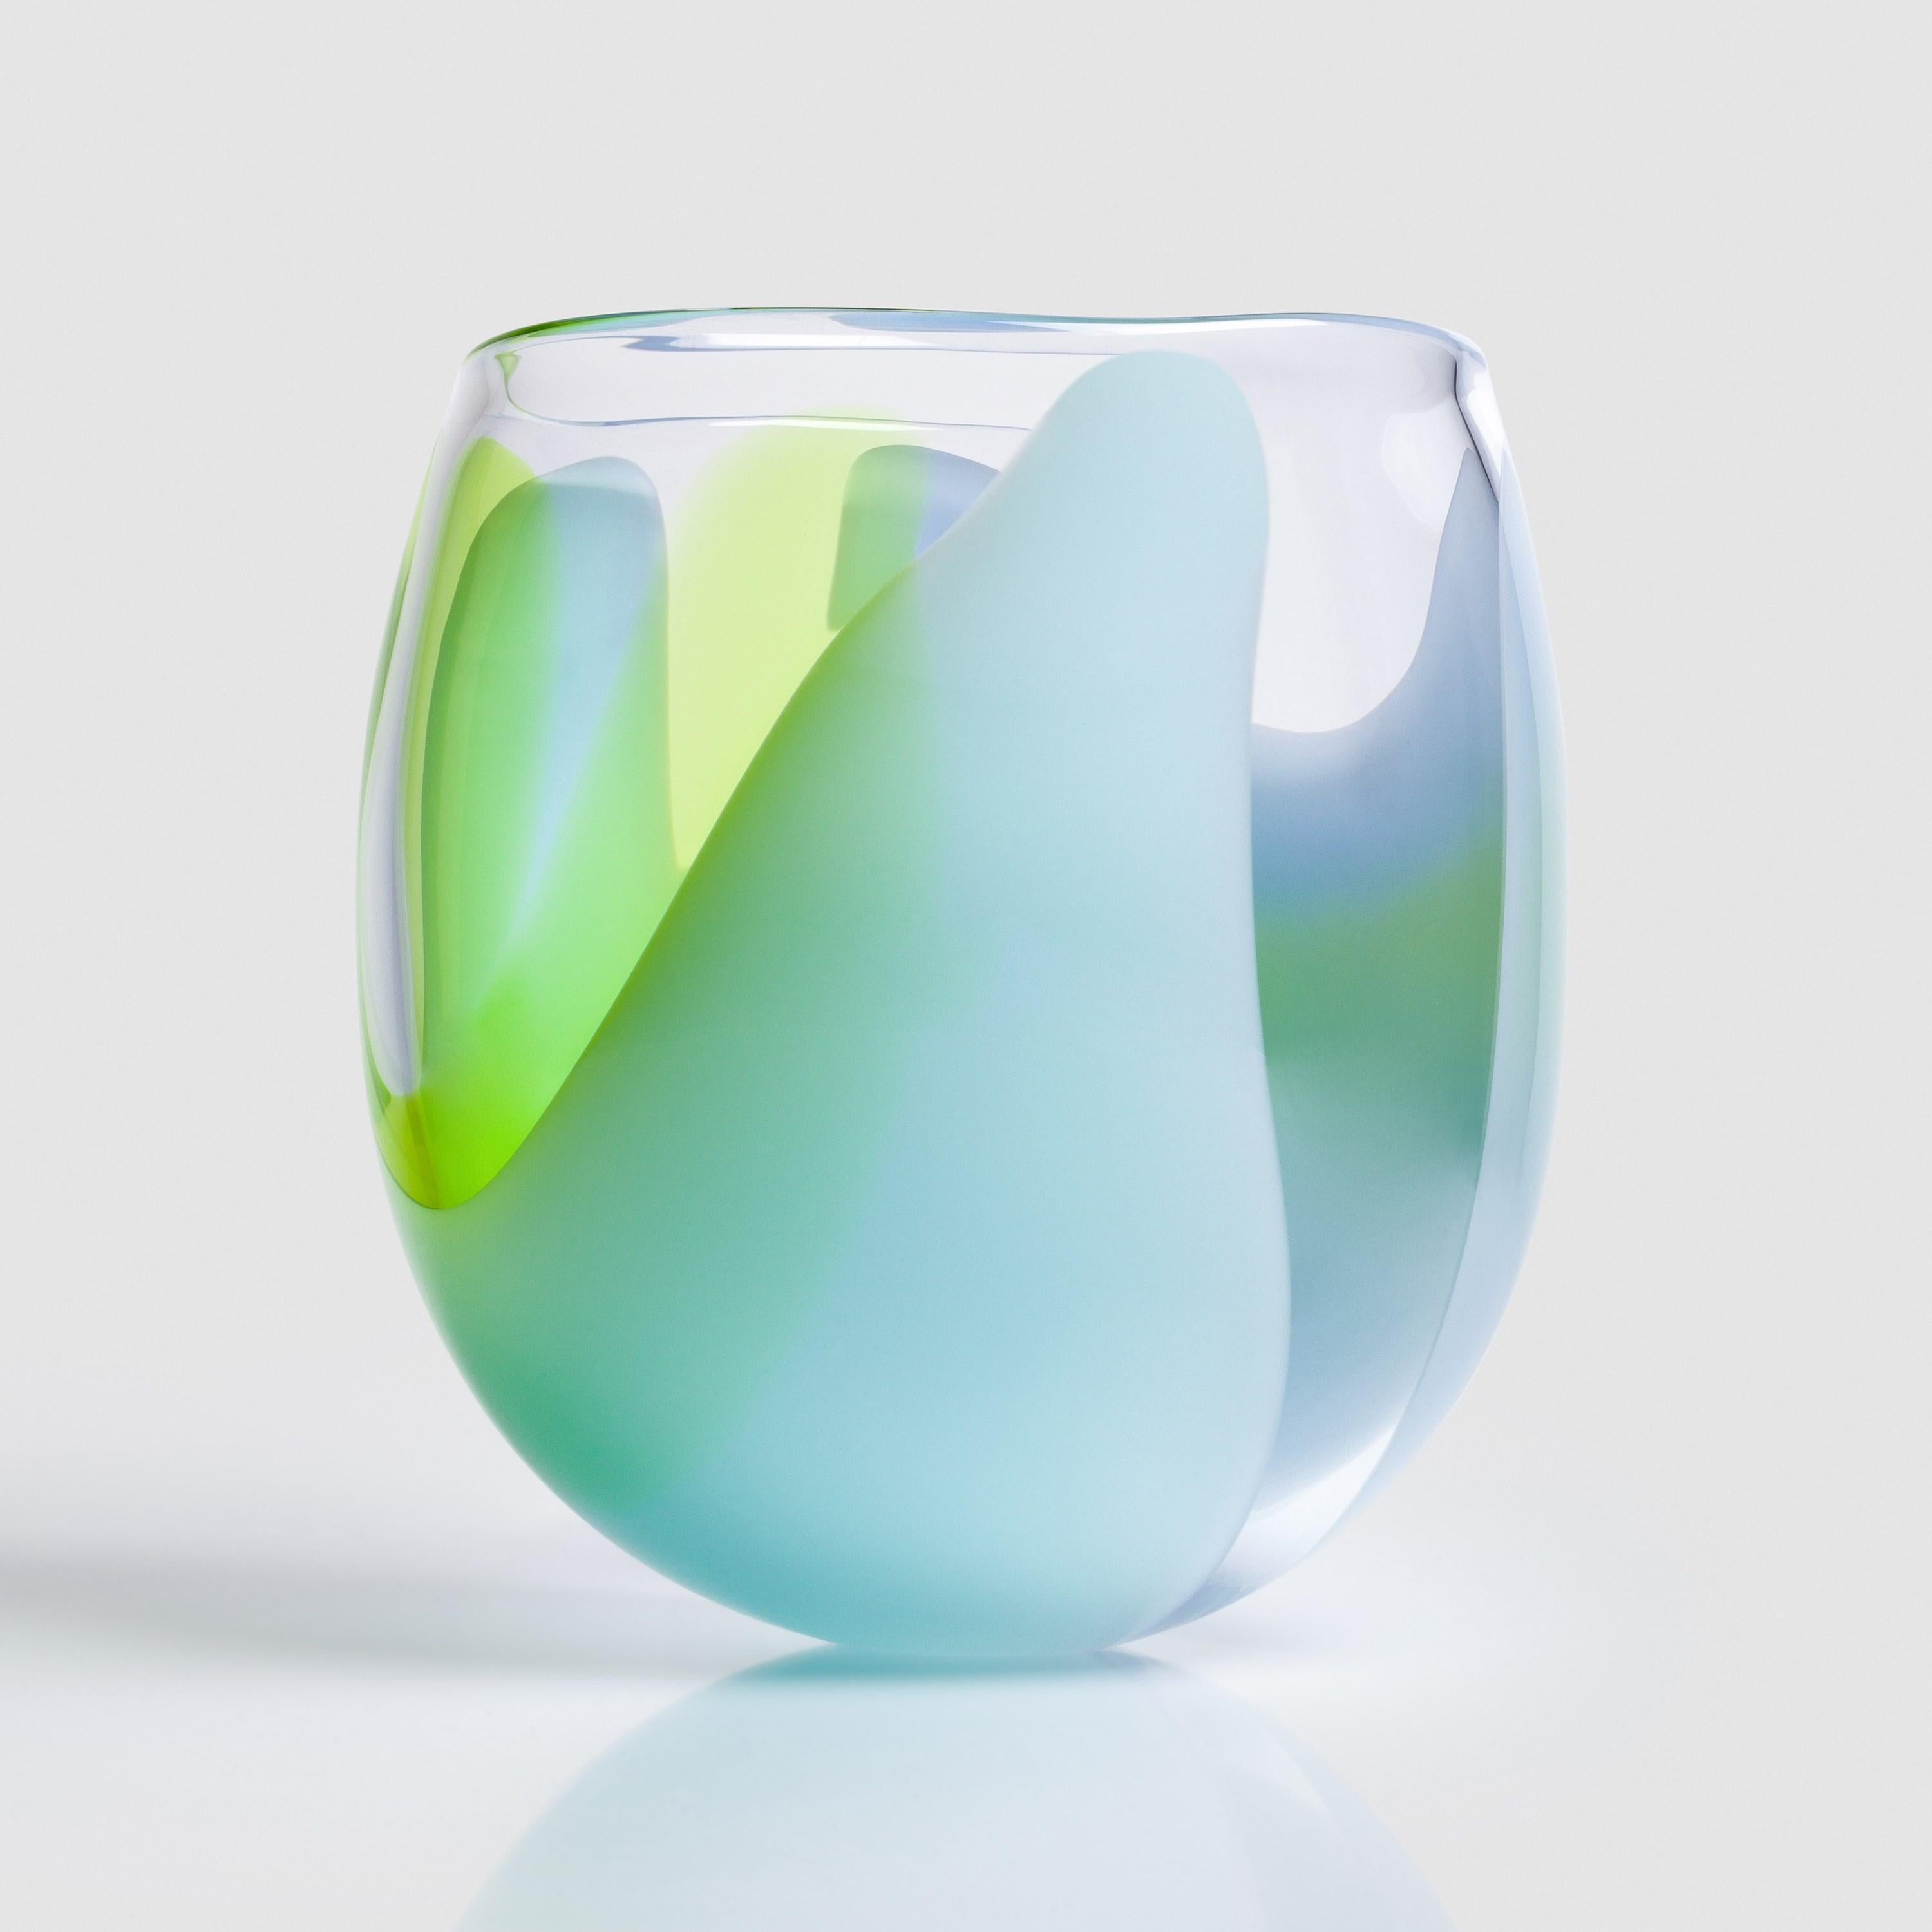 Organic Modern Waves No 637 is a blue & lime handblown glass sculptural bowl by Neil Wilkin For Sale